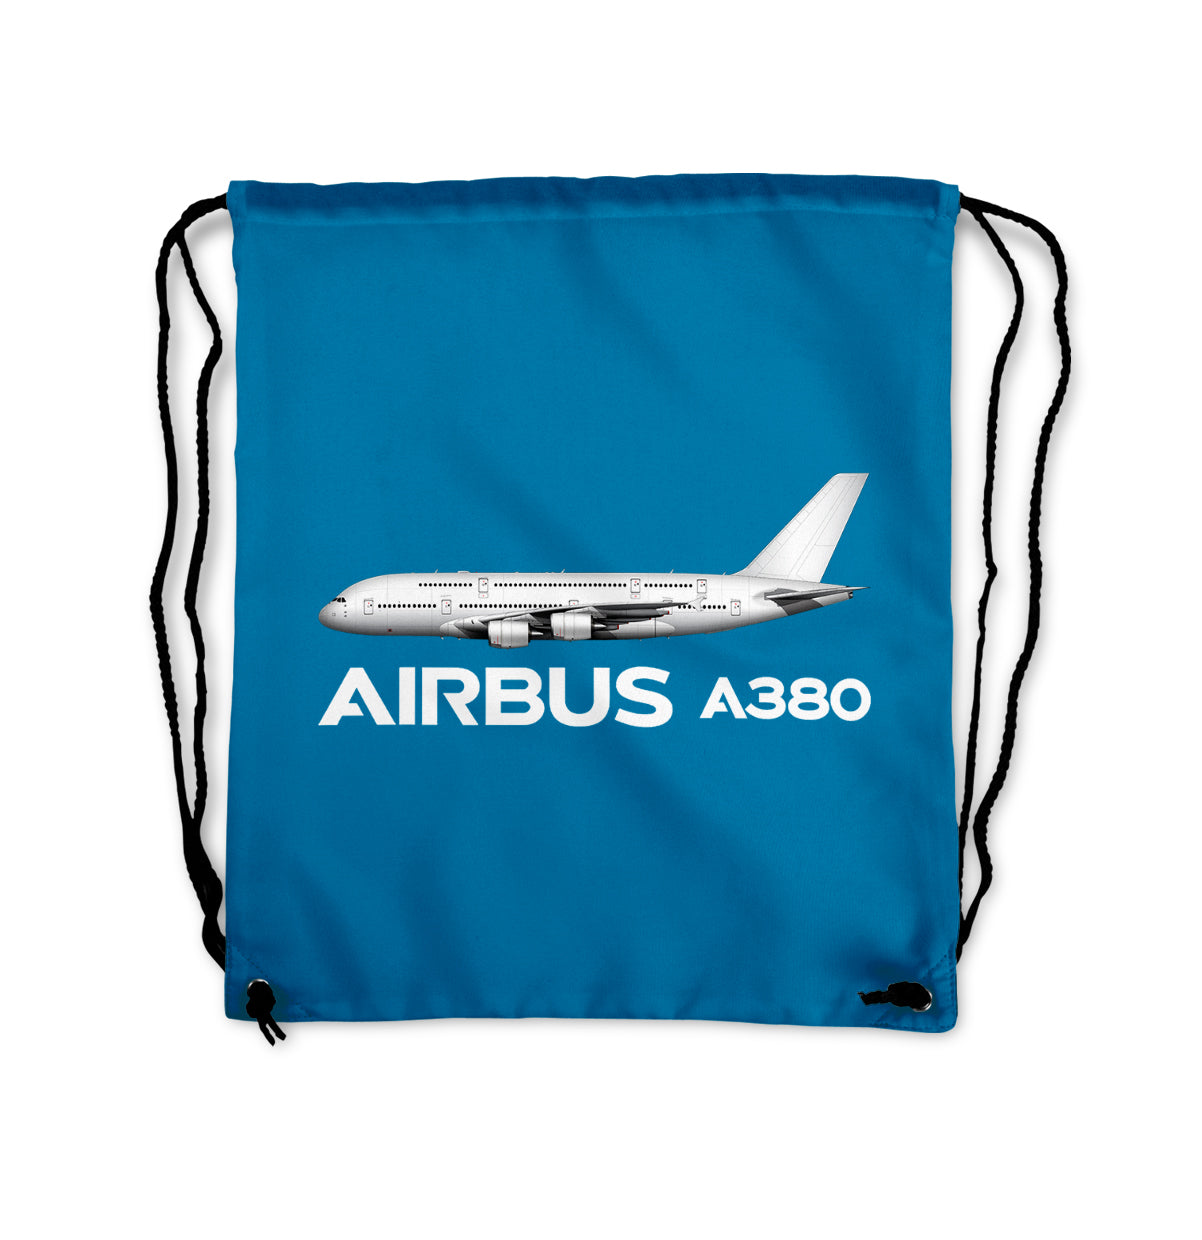 The Airbus A380 Designed Drawstring Bags